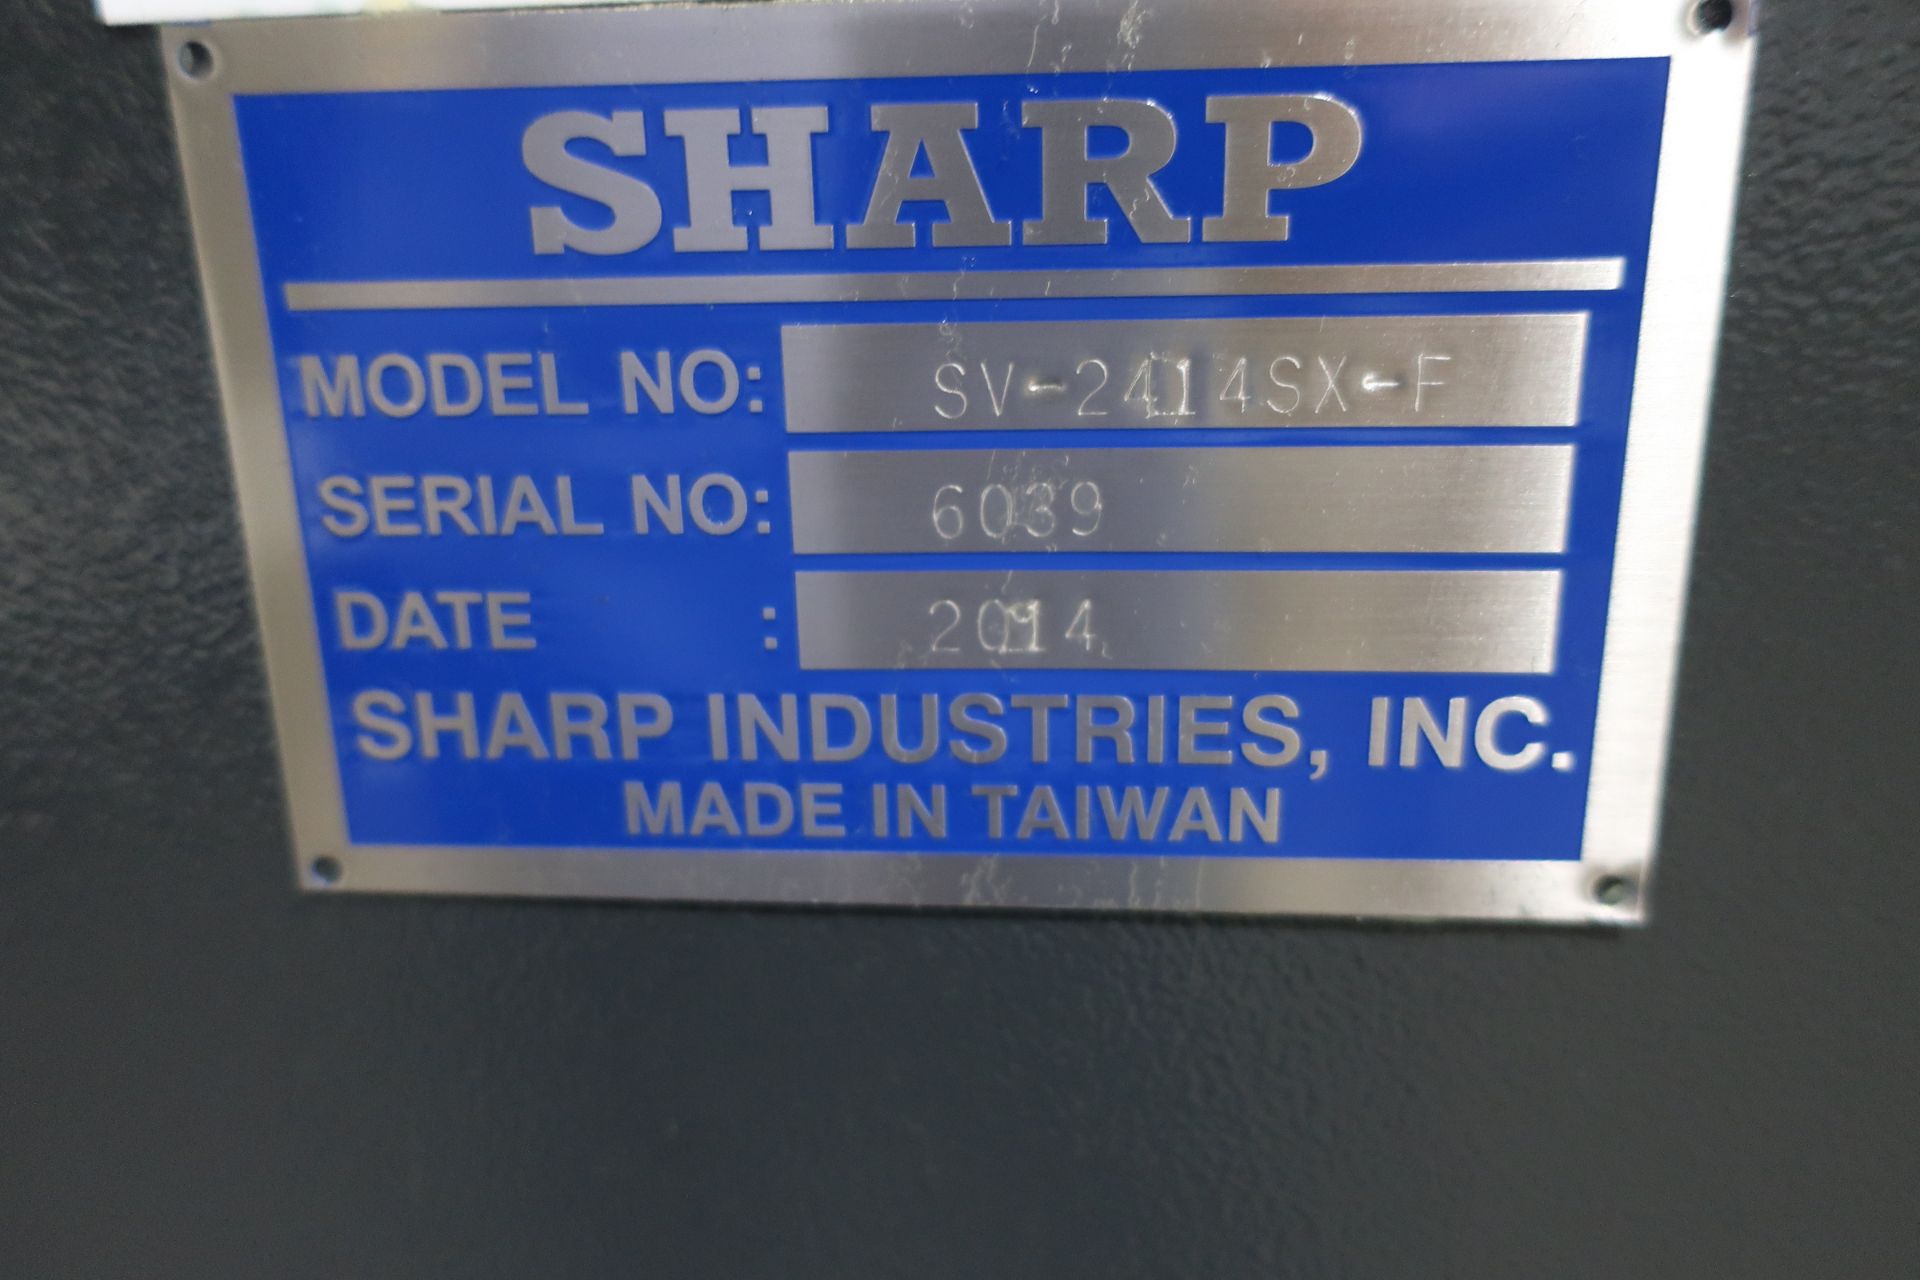 Sharp Model SV-2414SX-F CNC 3-Axis Vertical Machining Center, S/N 6039, New 2014, - Image 10 of 12